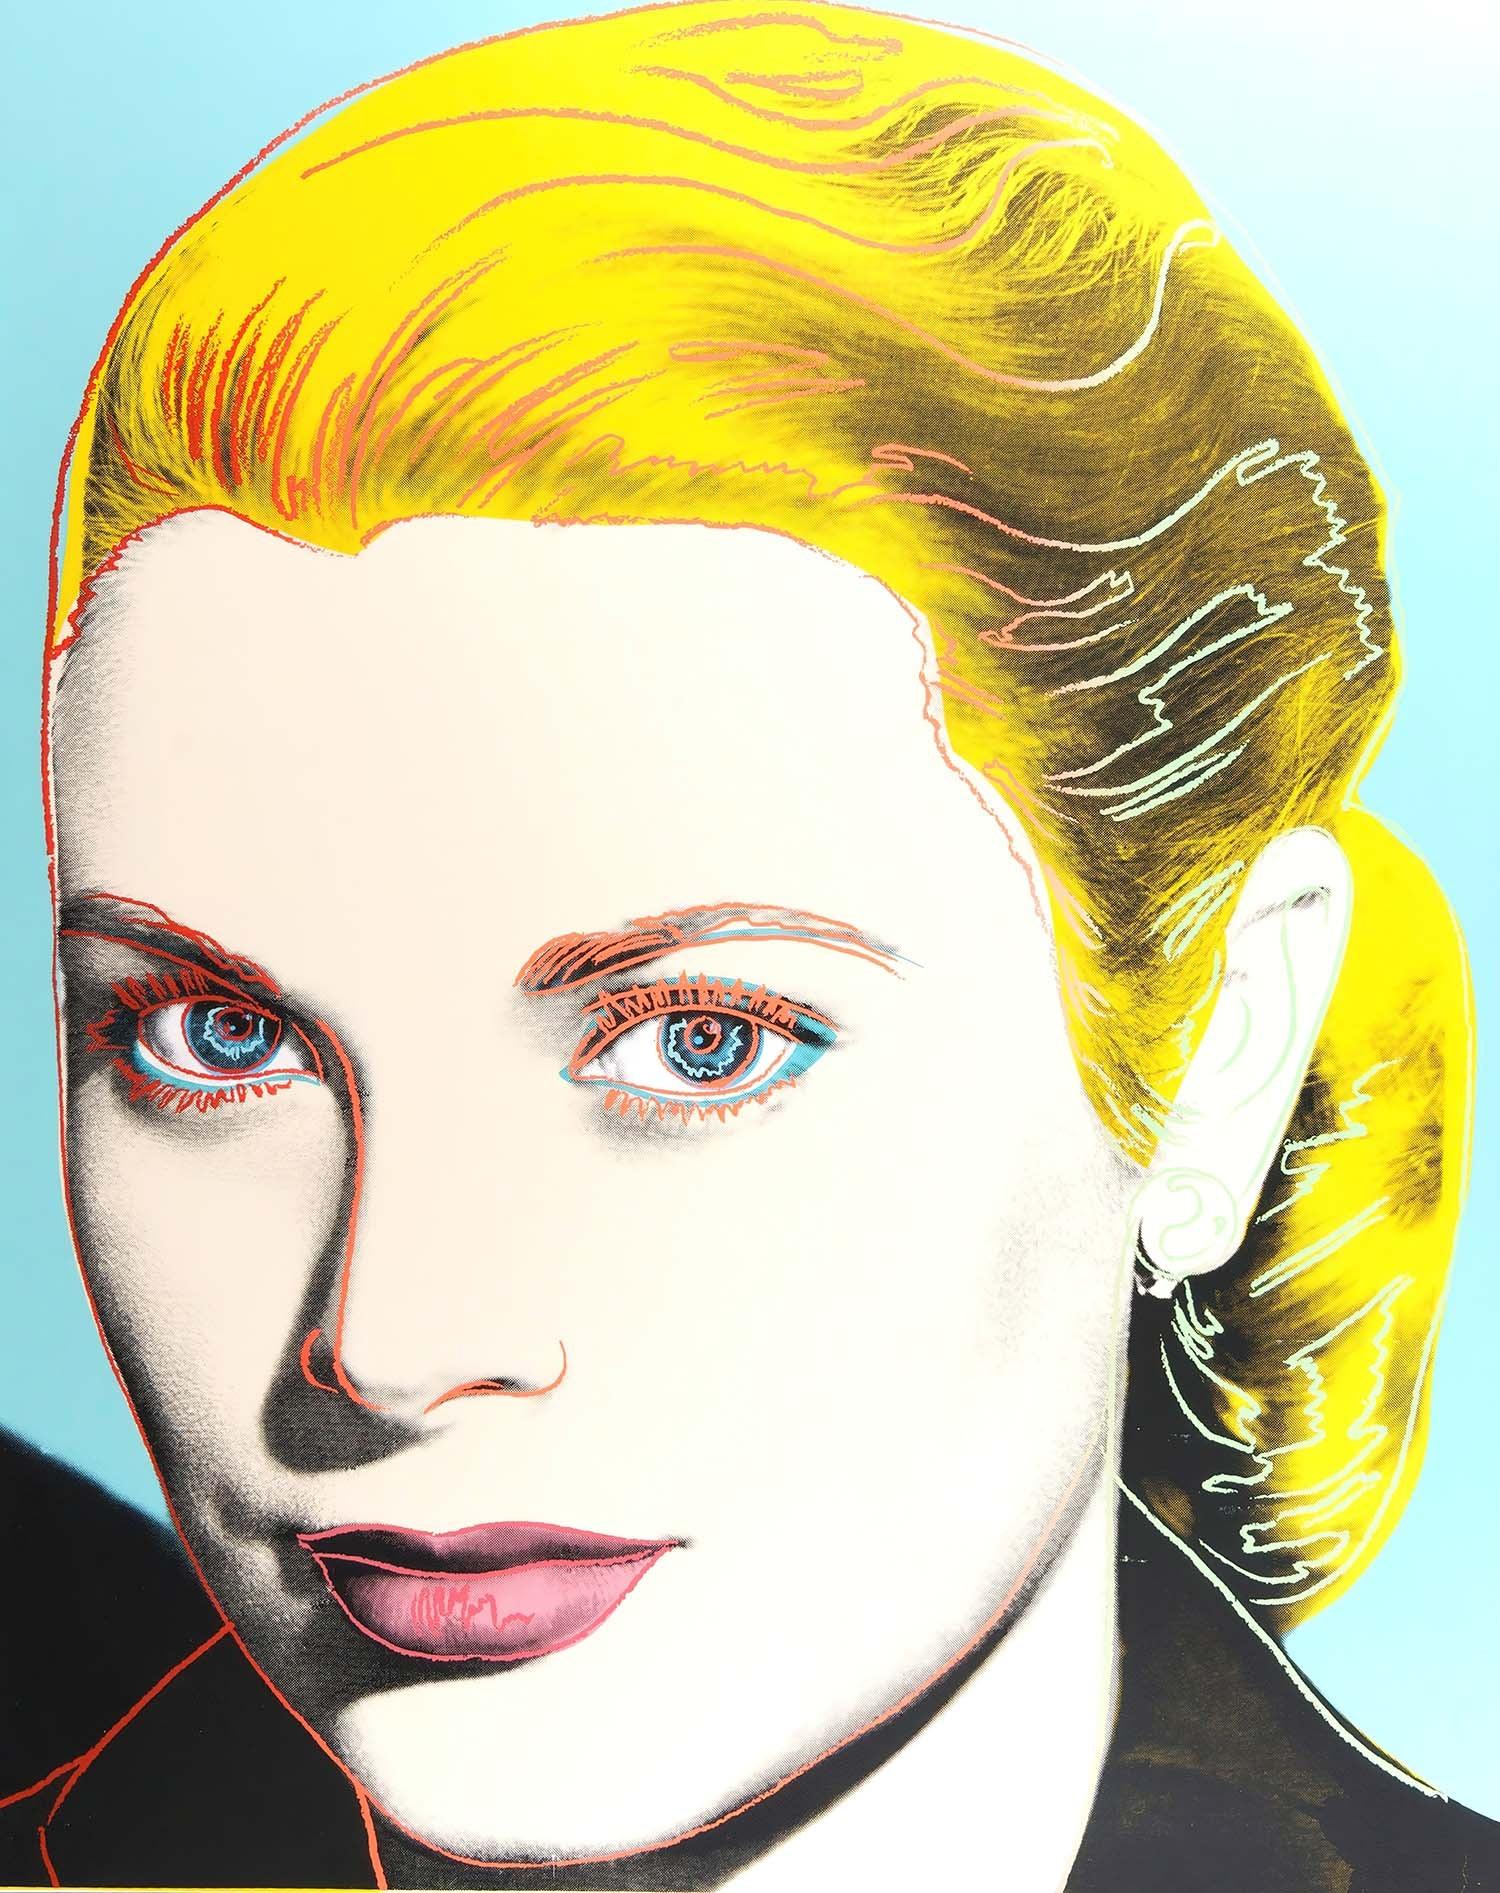 CoolWalls.ca Posters, Prints, & Visual Artwork 15" x 19" Grace Kelly Andy Warhol Poster Vintage Artwork: Peel_n_Stick onto the wall, wallpaper like fabric